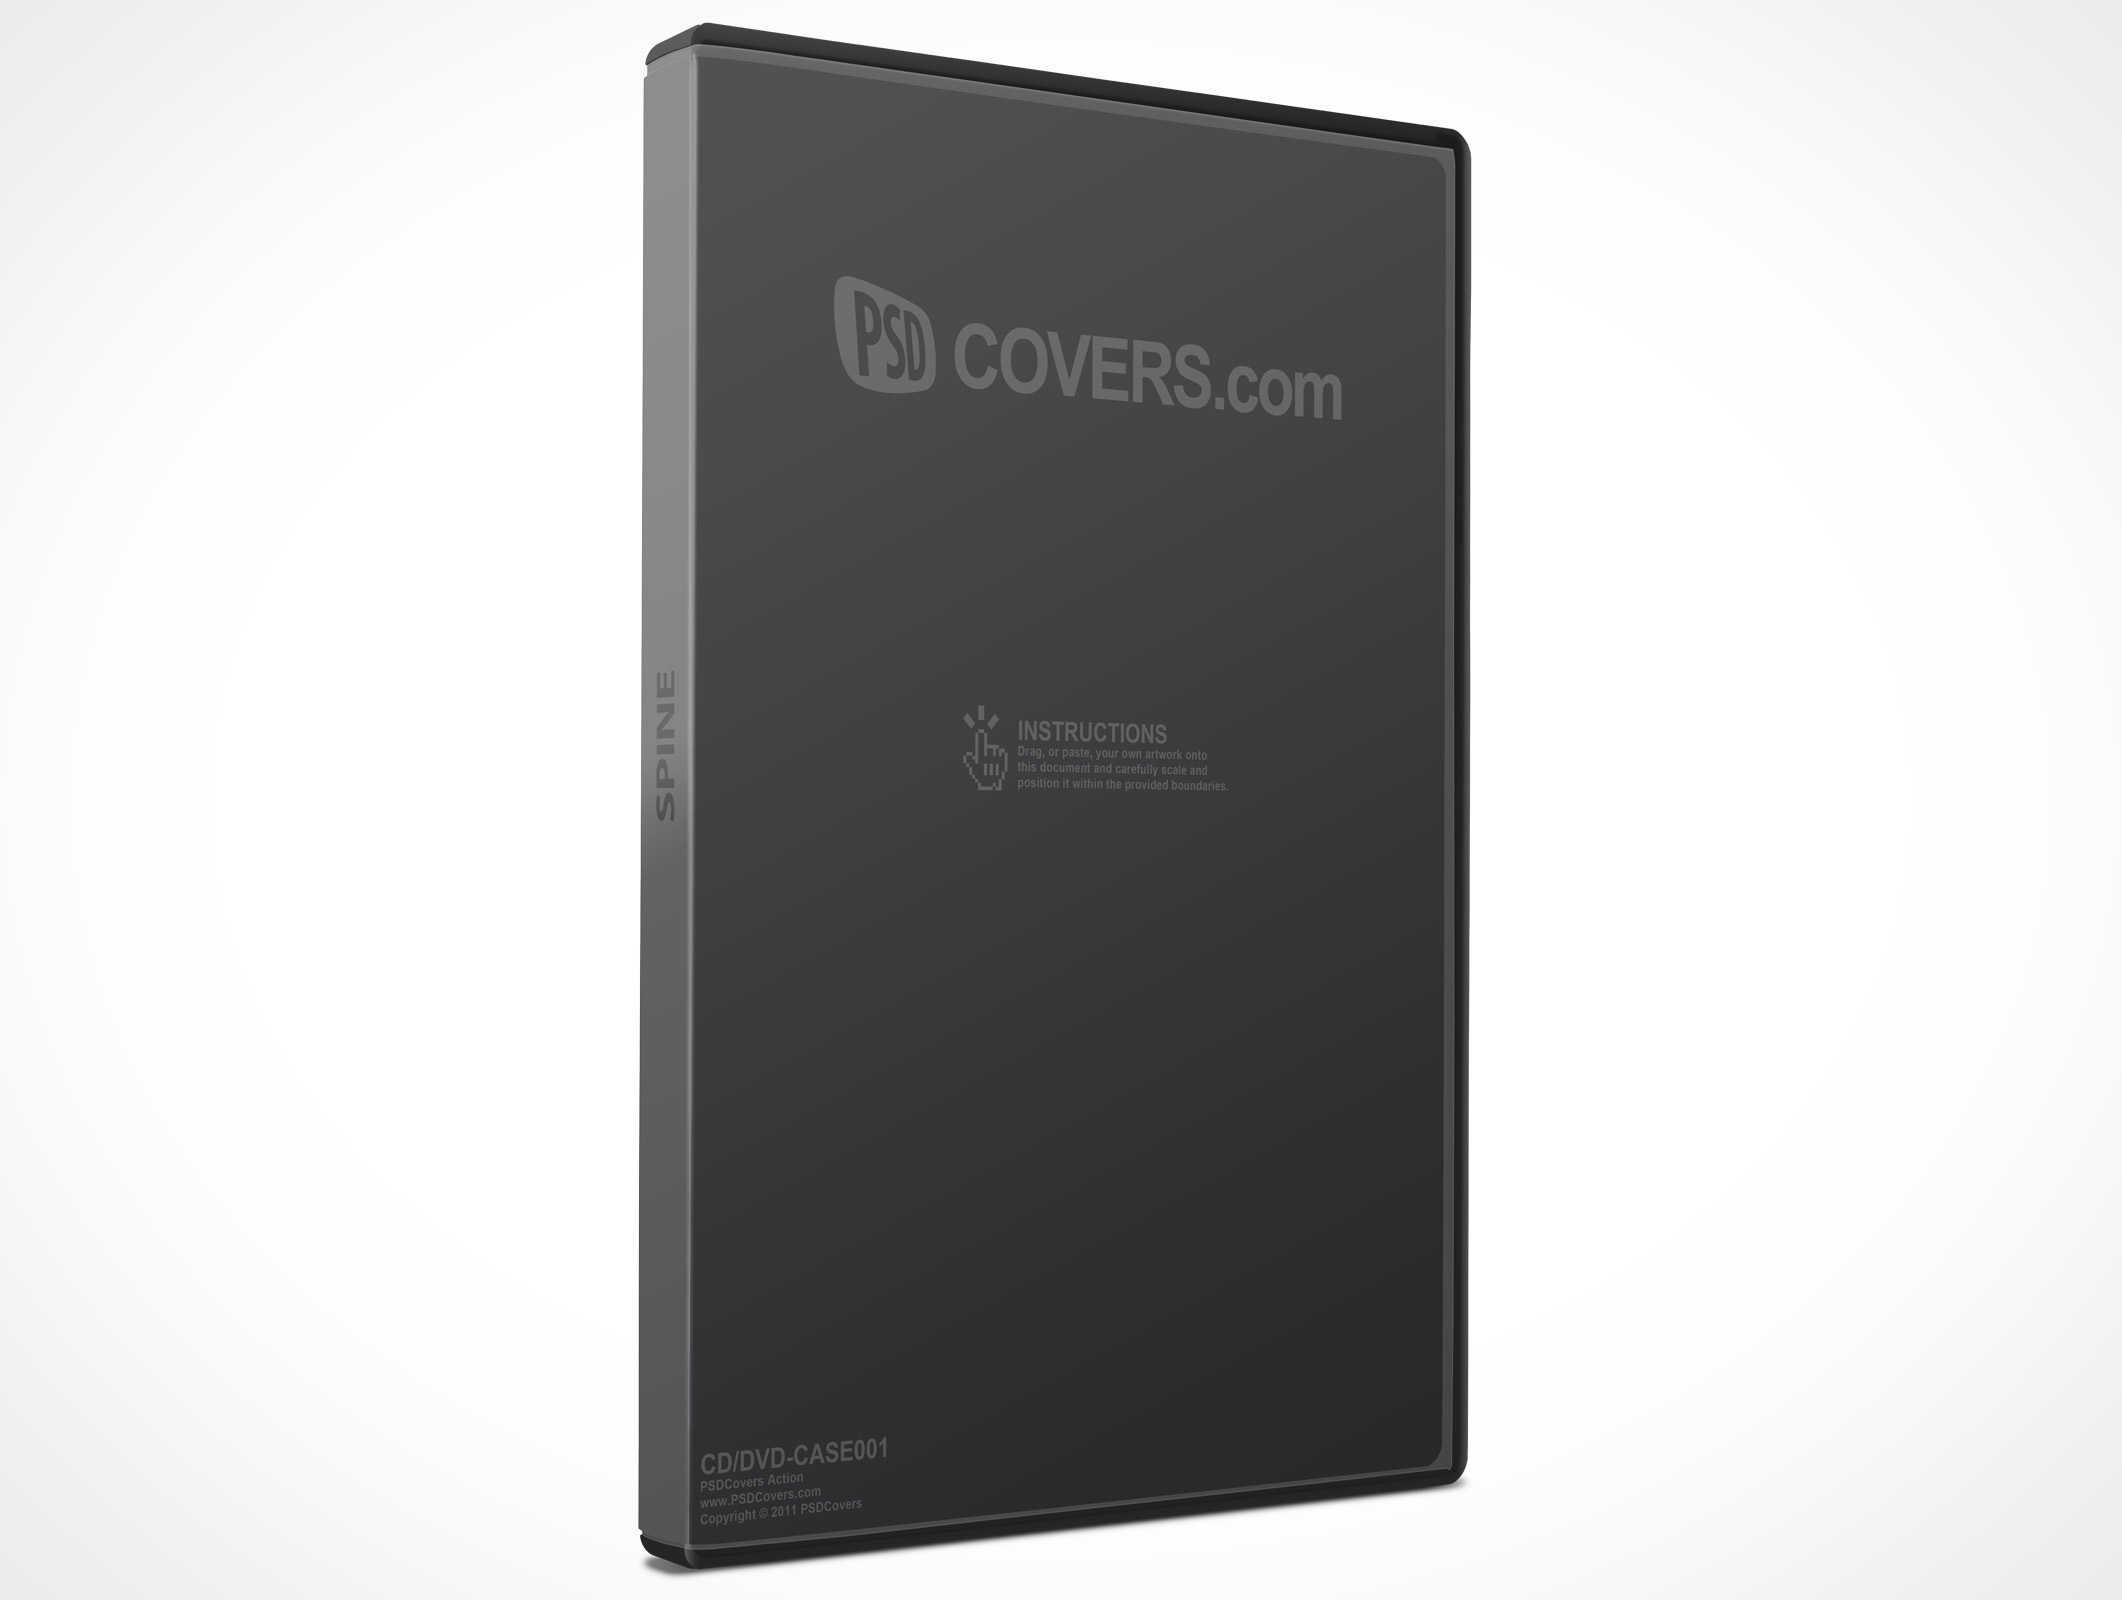 DVD Archives • PSDCovers